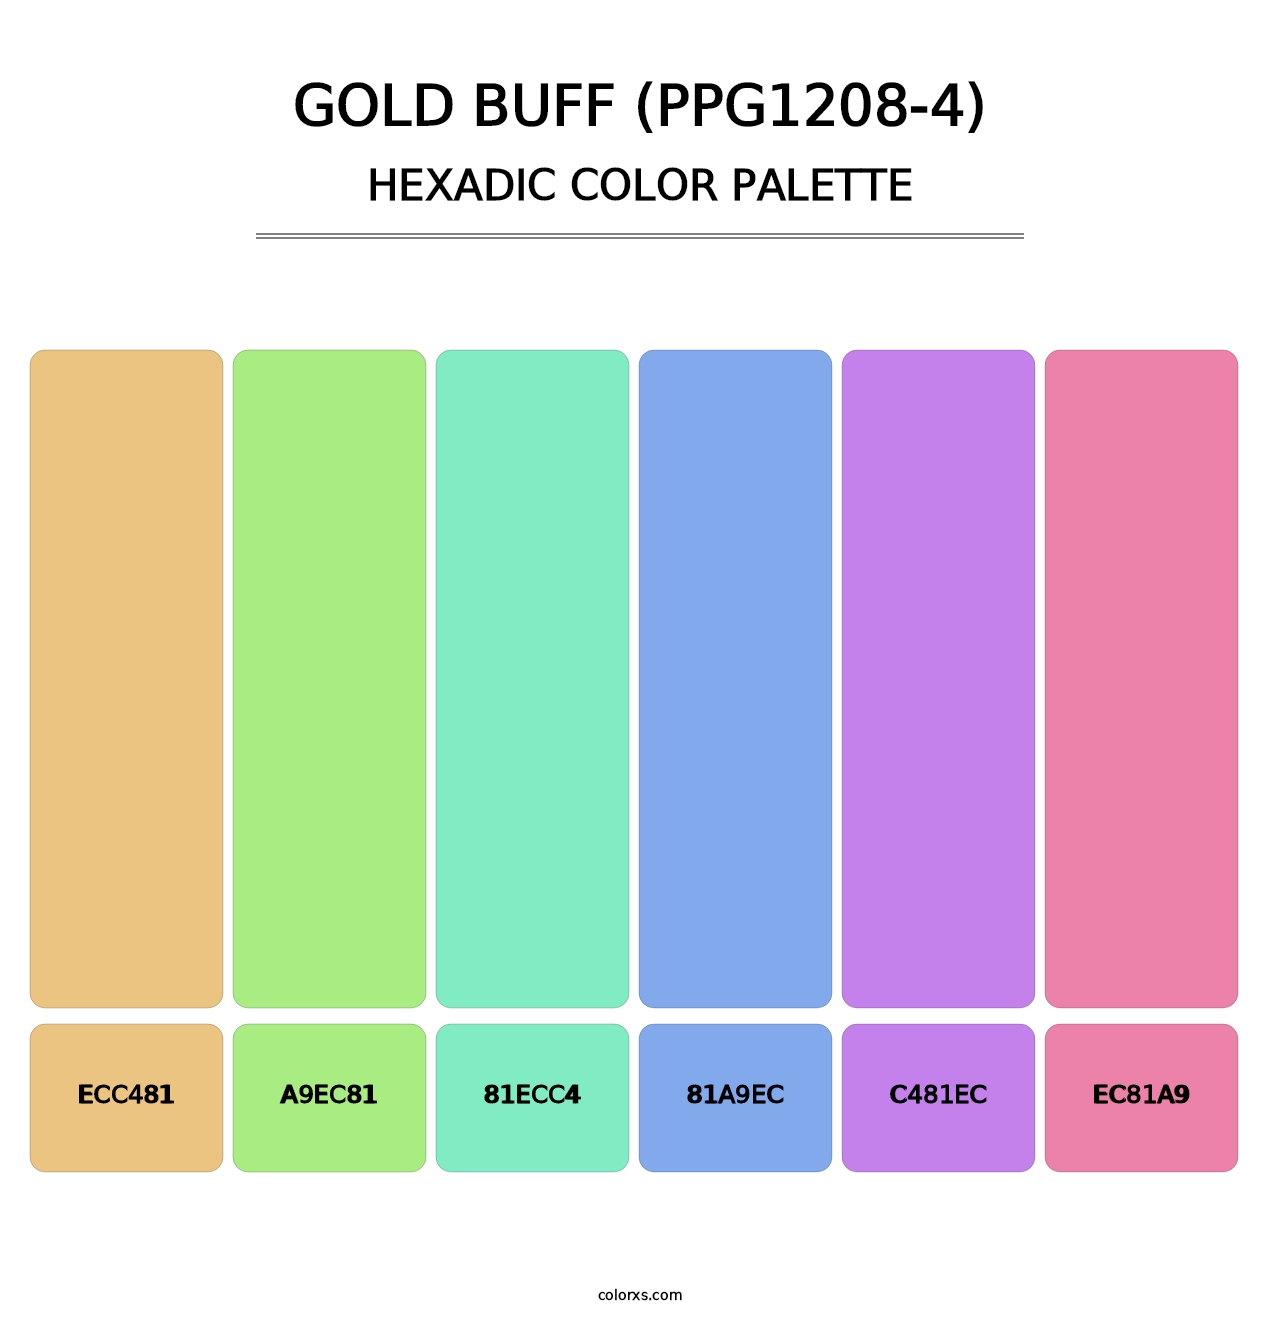 Gold Buff (PPG1208-4) - Hexadic Color Palette